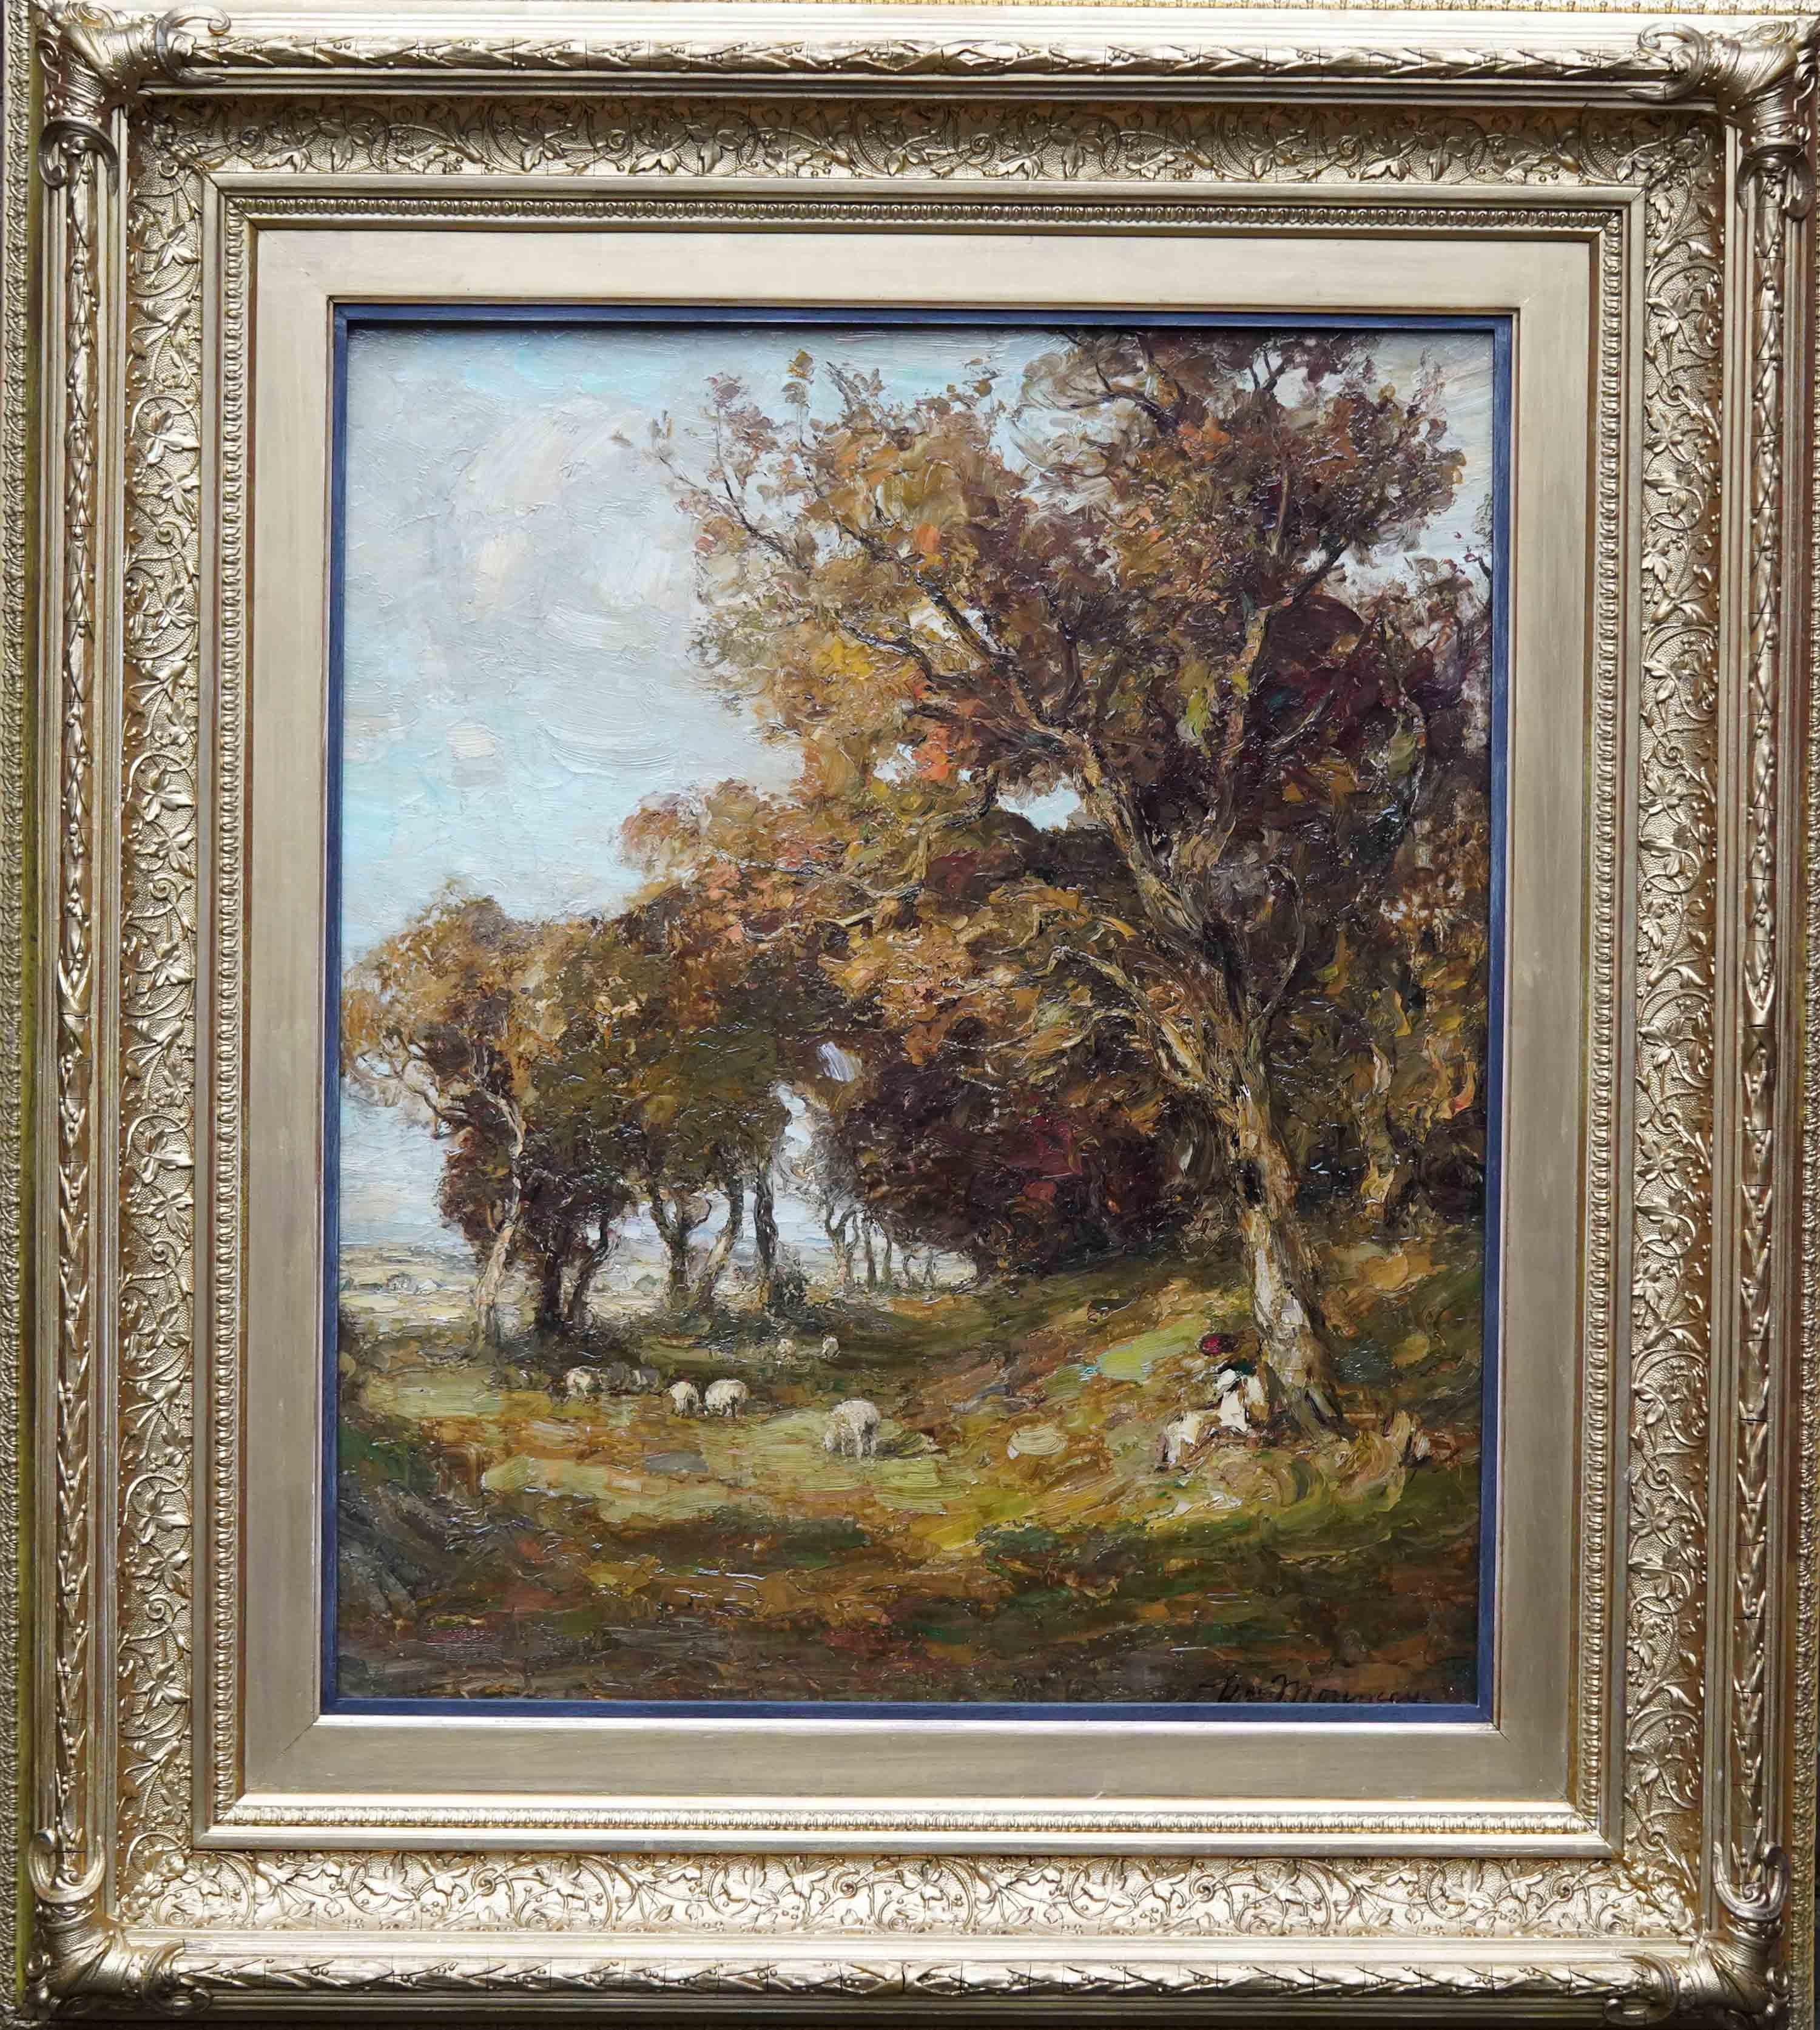 Landscape with Sheep - Scottish 19th century Kirkcudbright art oil painting  For Sale 8